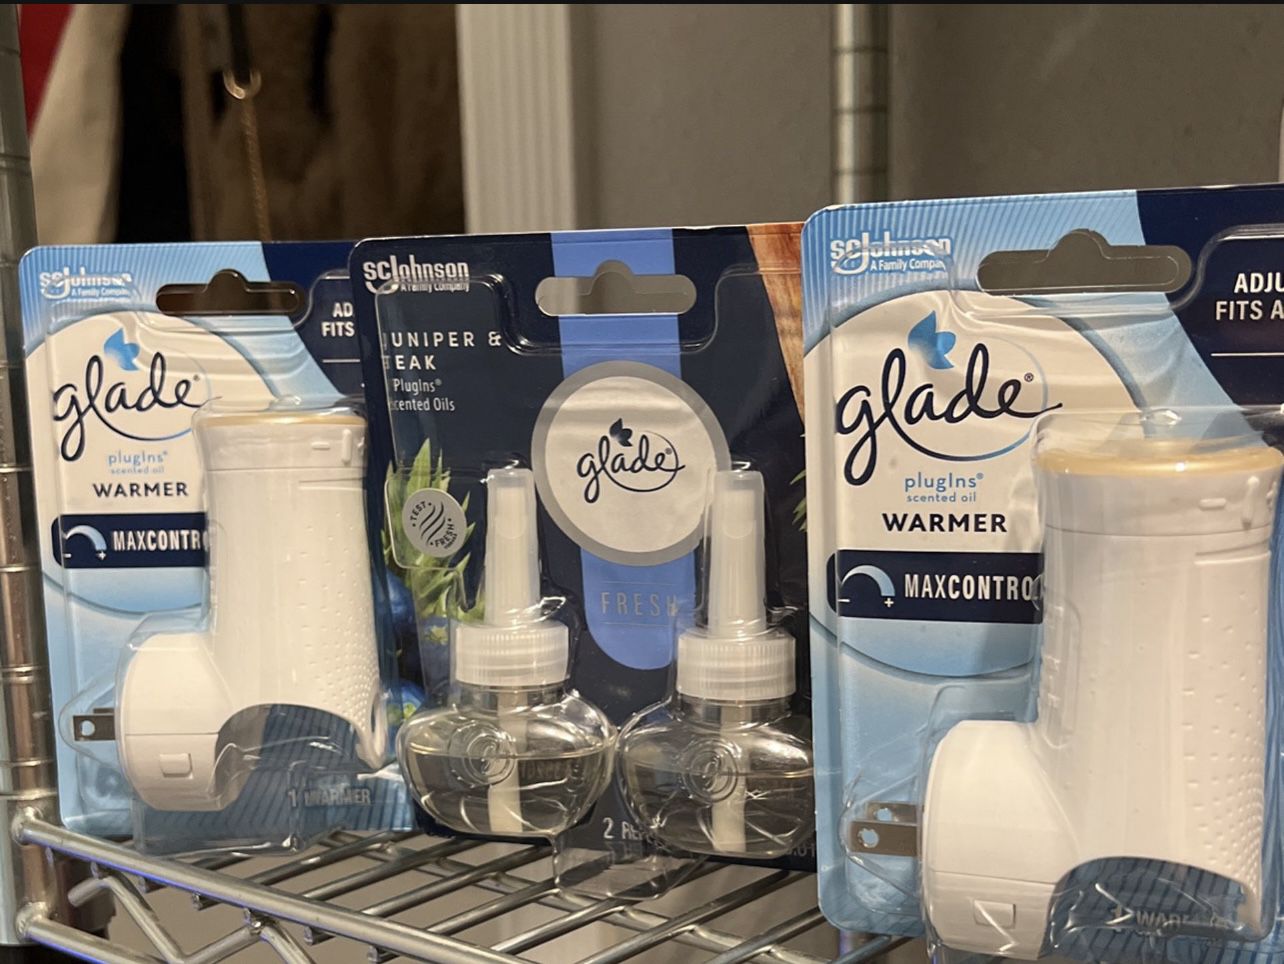 Glade $5 For All